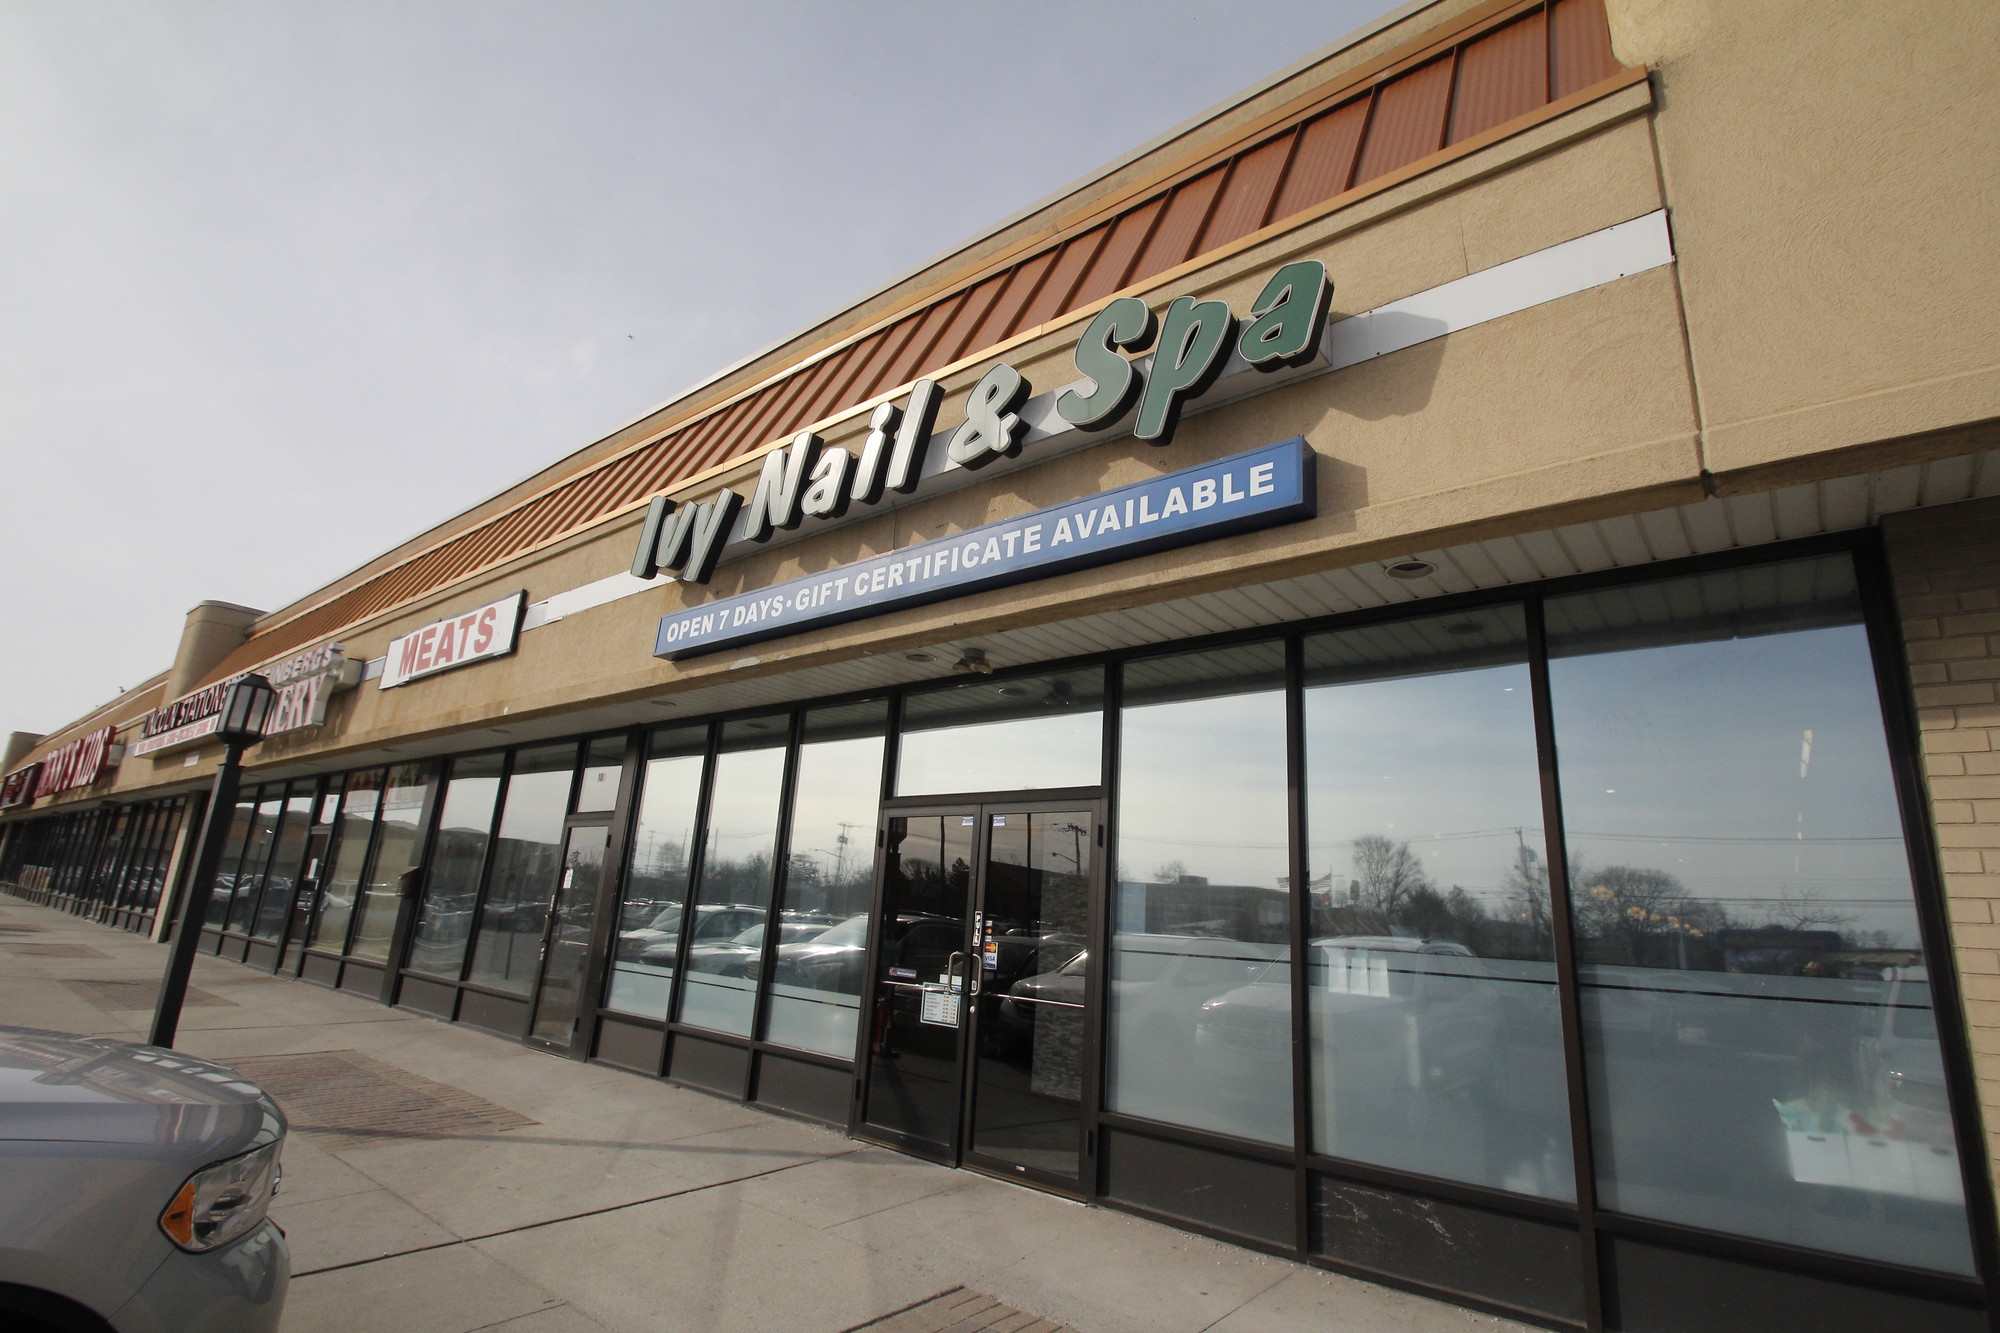 The state Department of Environmental Conservation has proposed a $3 million plan to clean up PCE contamination at the former site of Smart Set Cleaners, now Ivy Nail Salon and Spa.